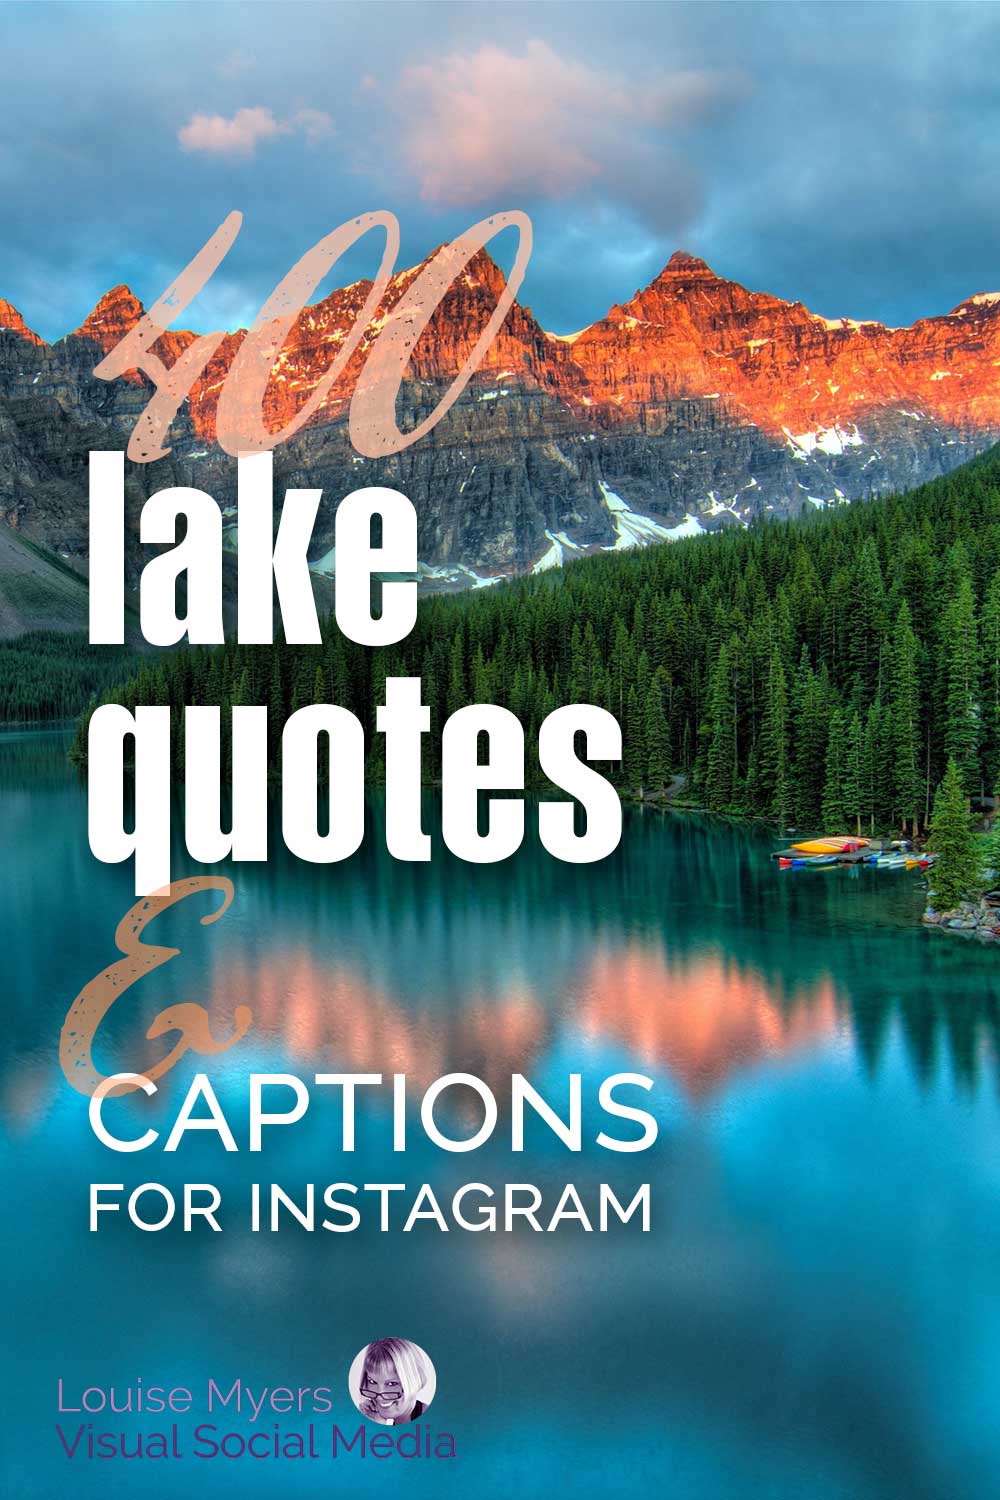 orange mountains reflected on blue lake says 400 lake quotes and captions for instagram.